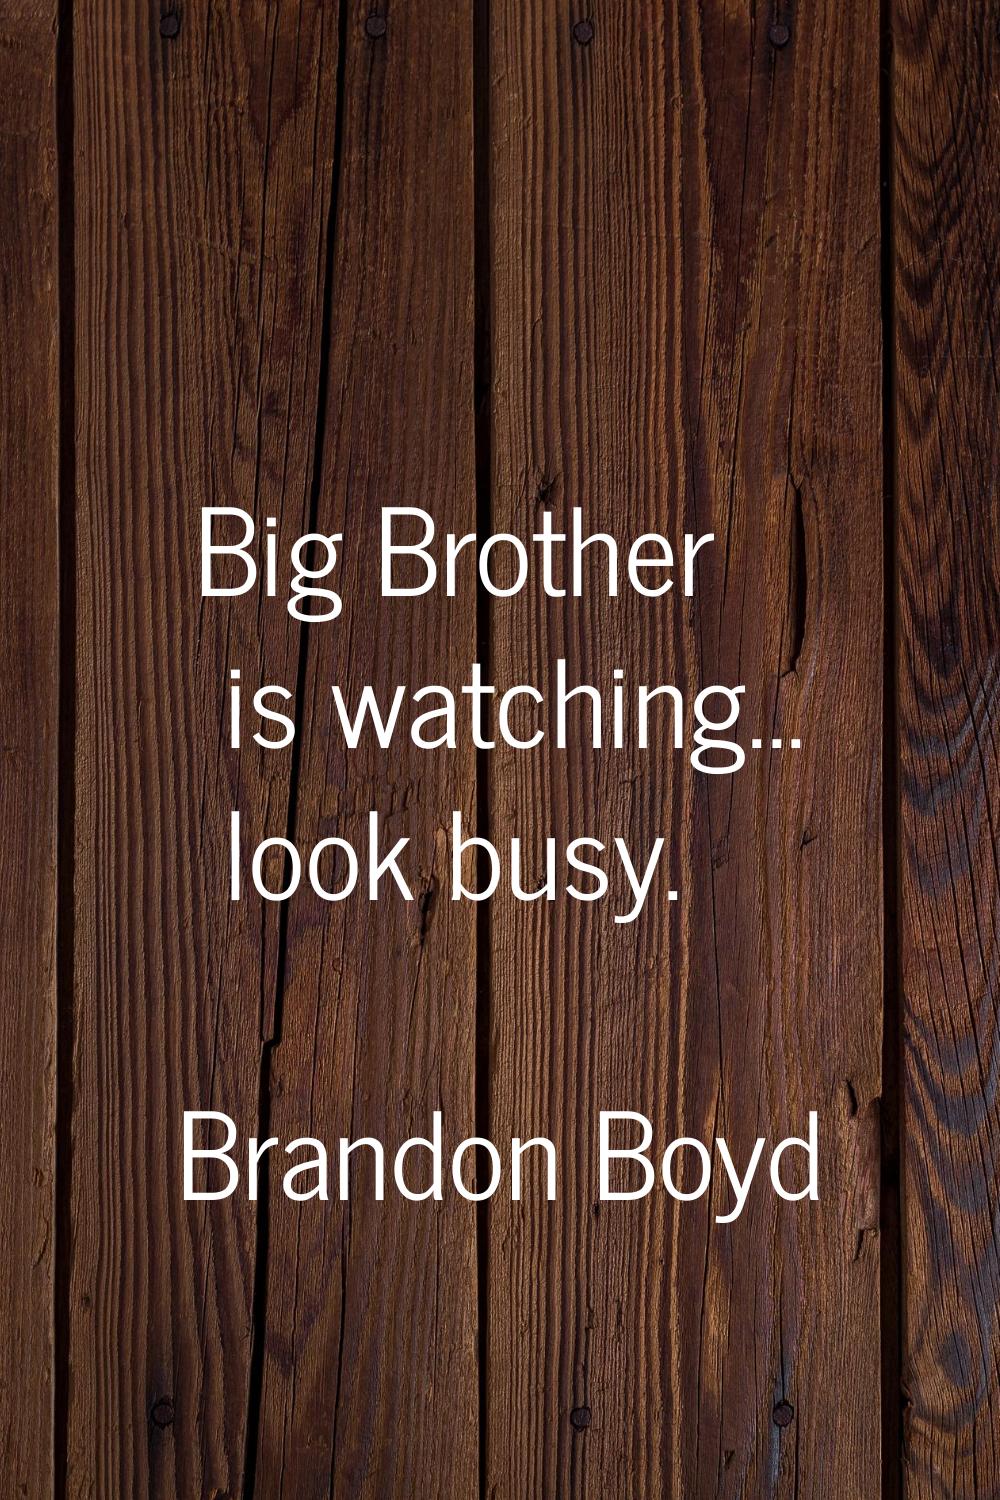 Big Brother is watching... look busy.